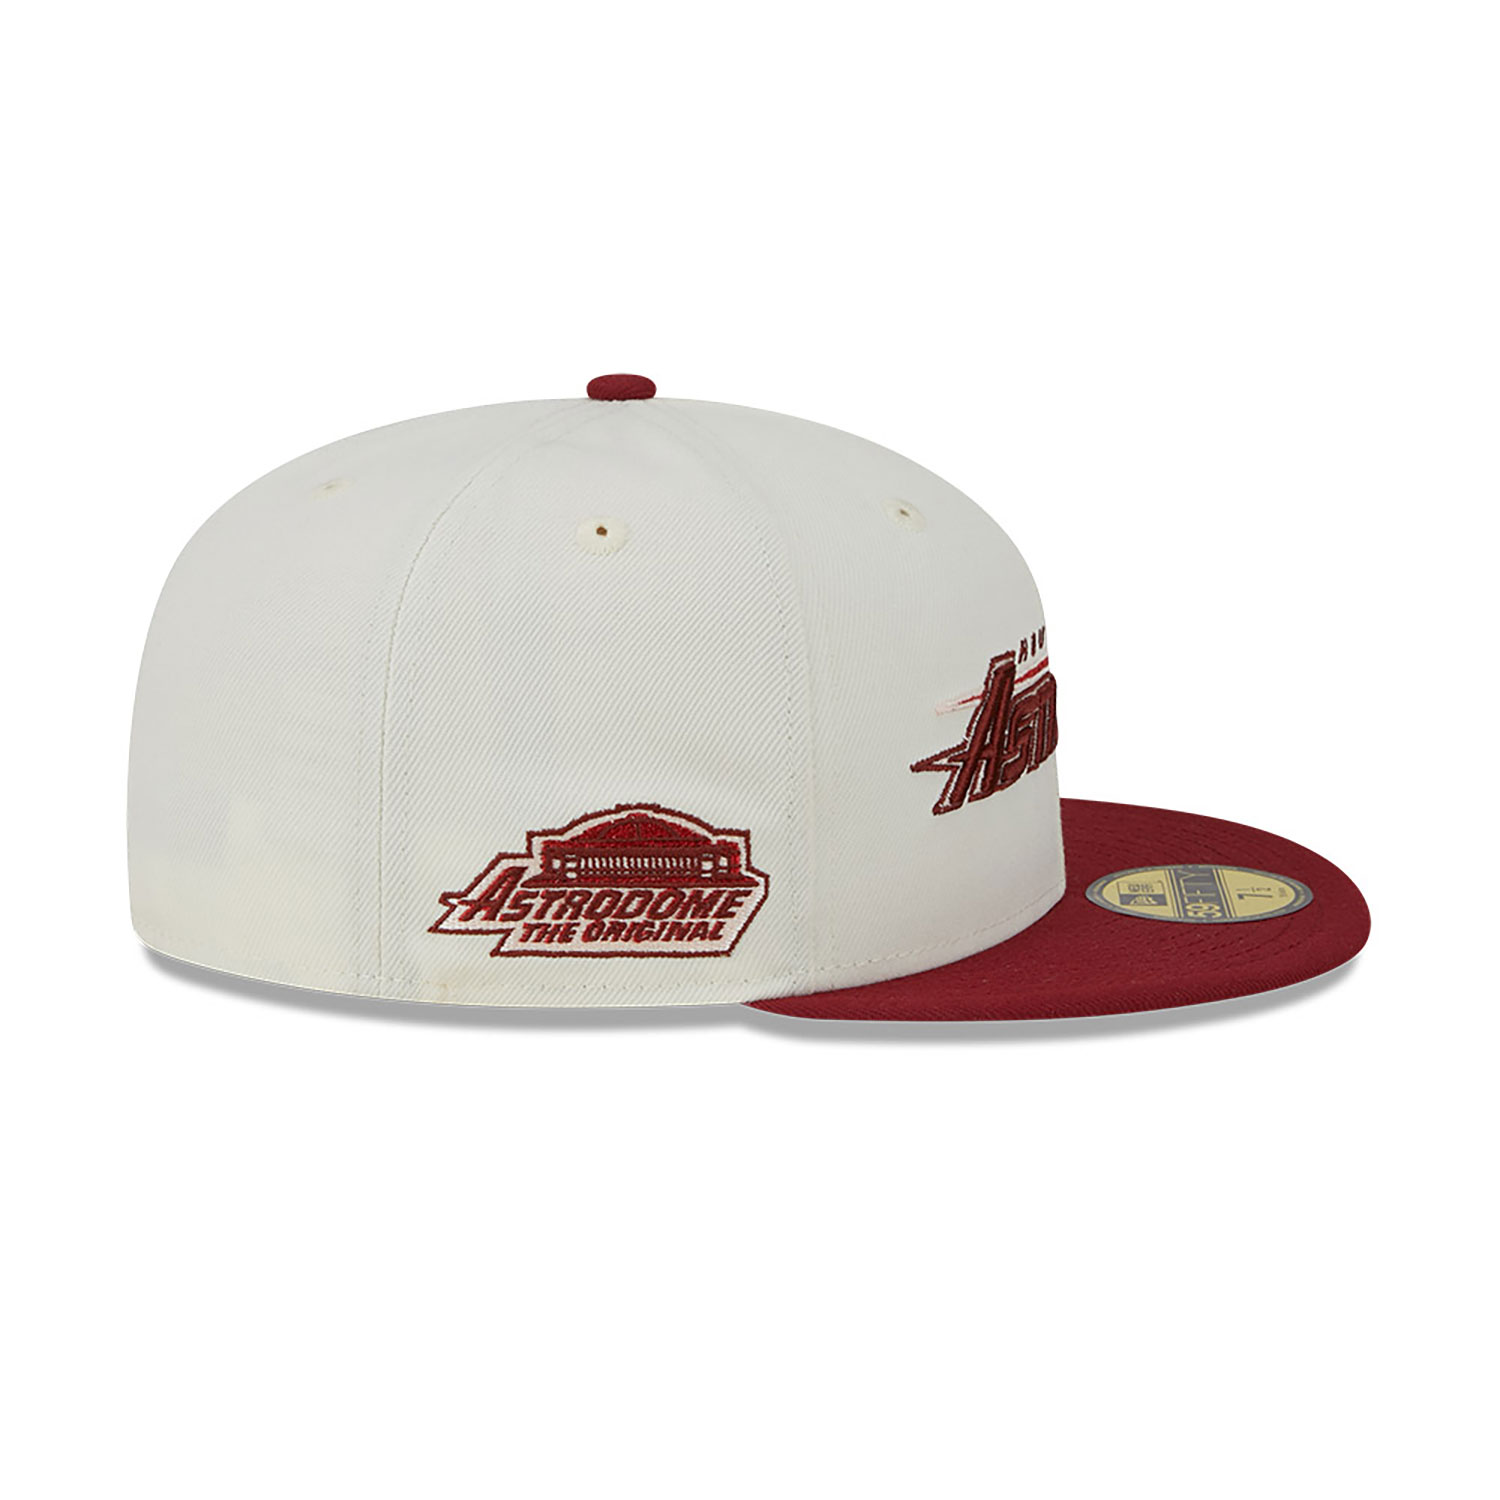 Houston Astros Be Mine White 59FIFTY Fitted Cap